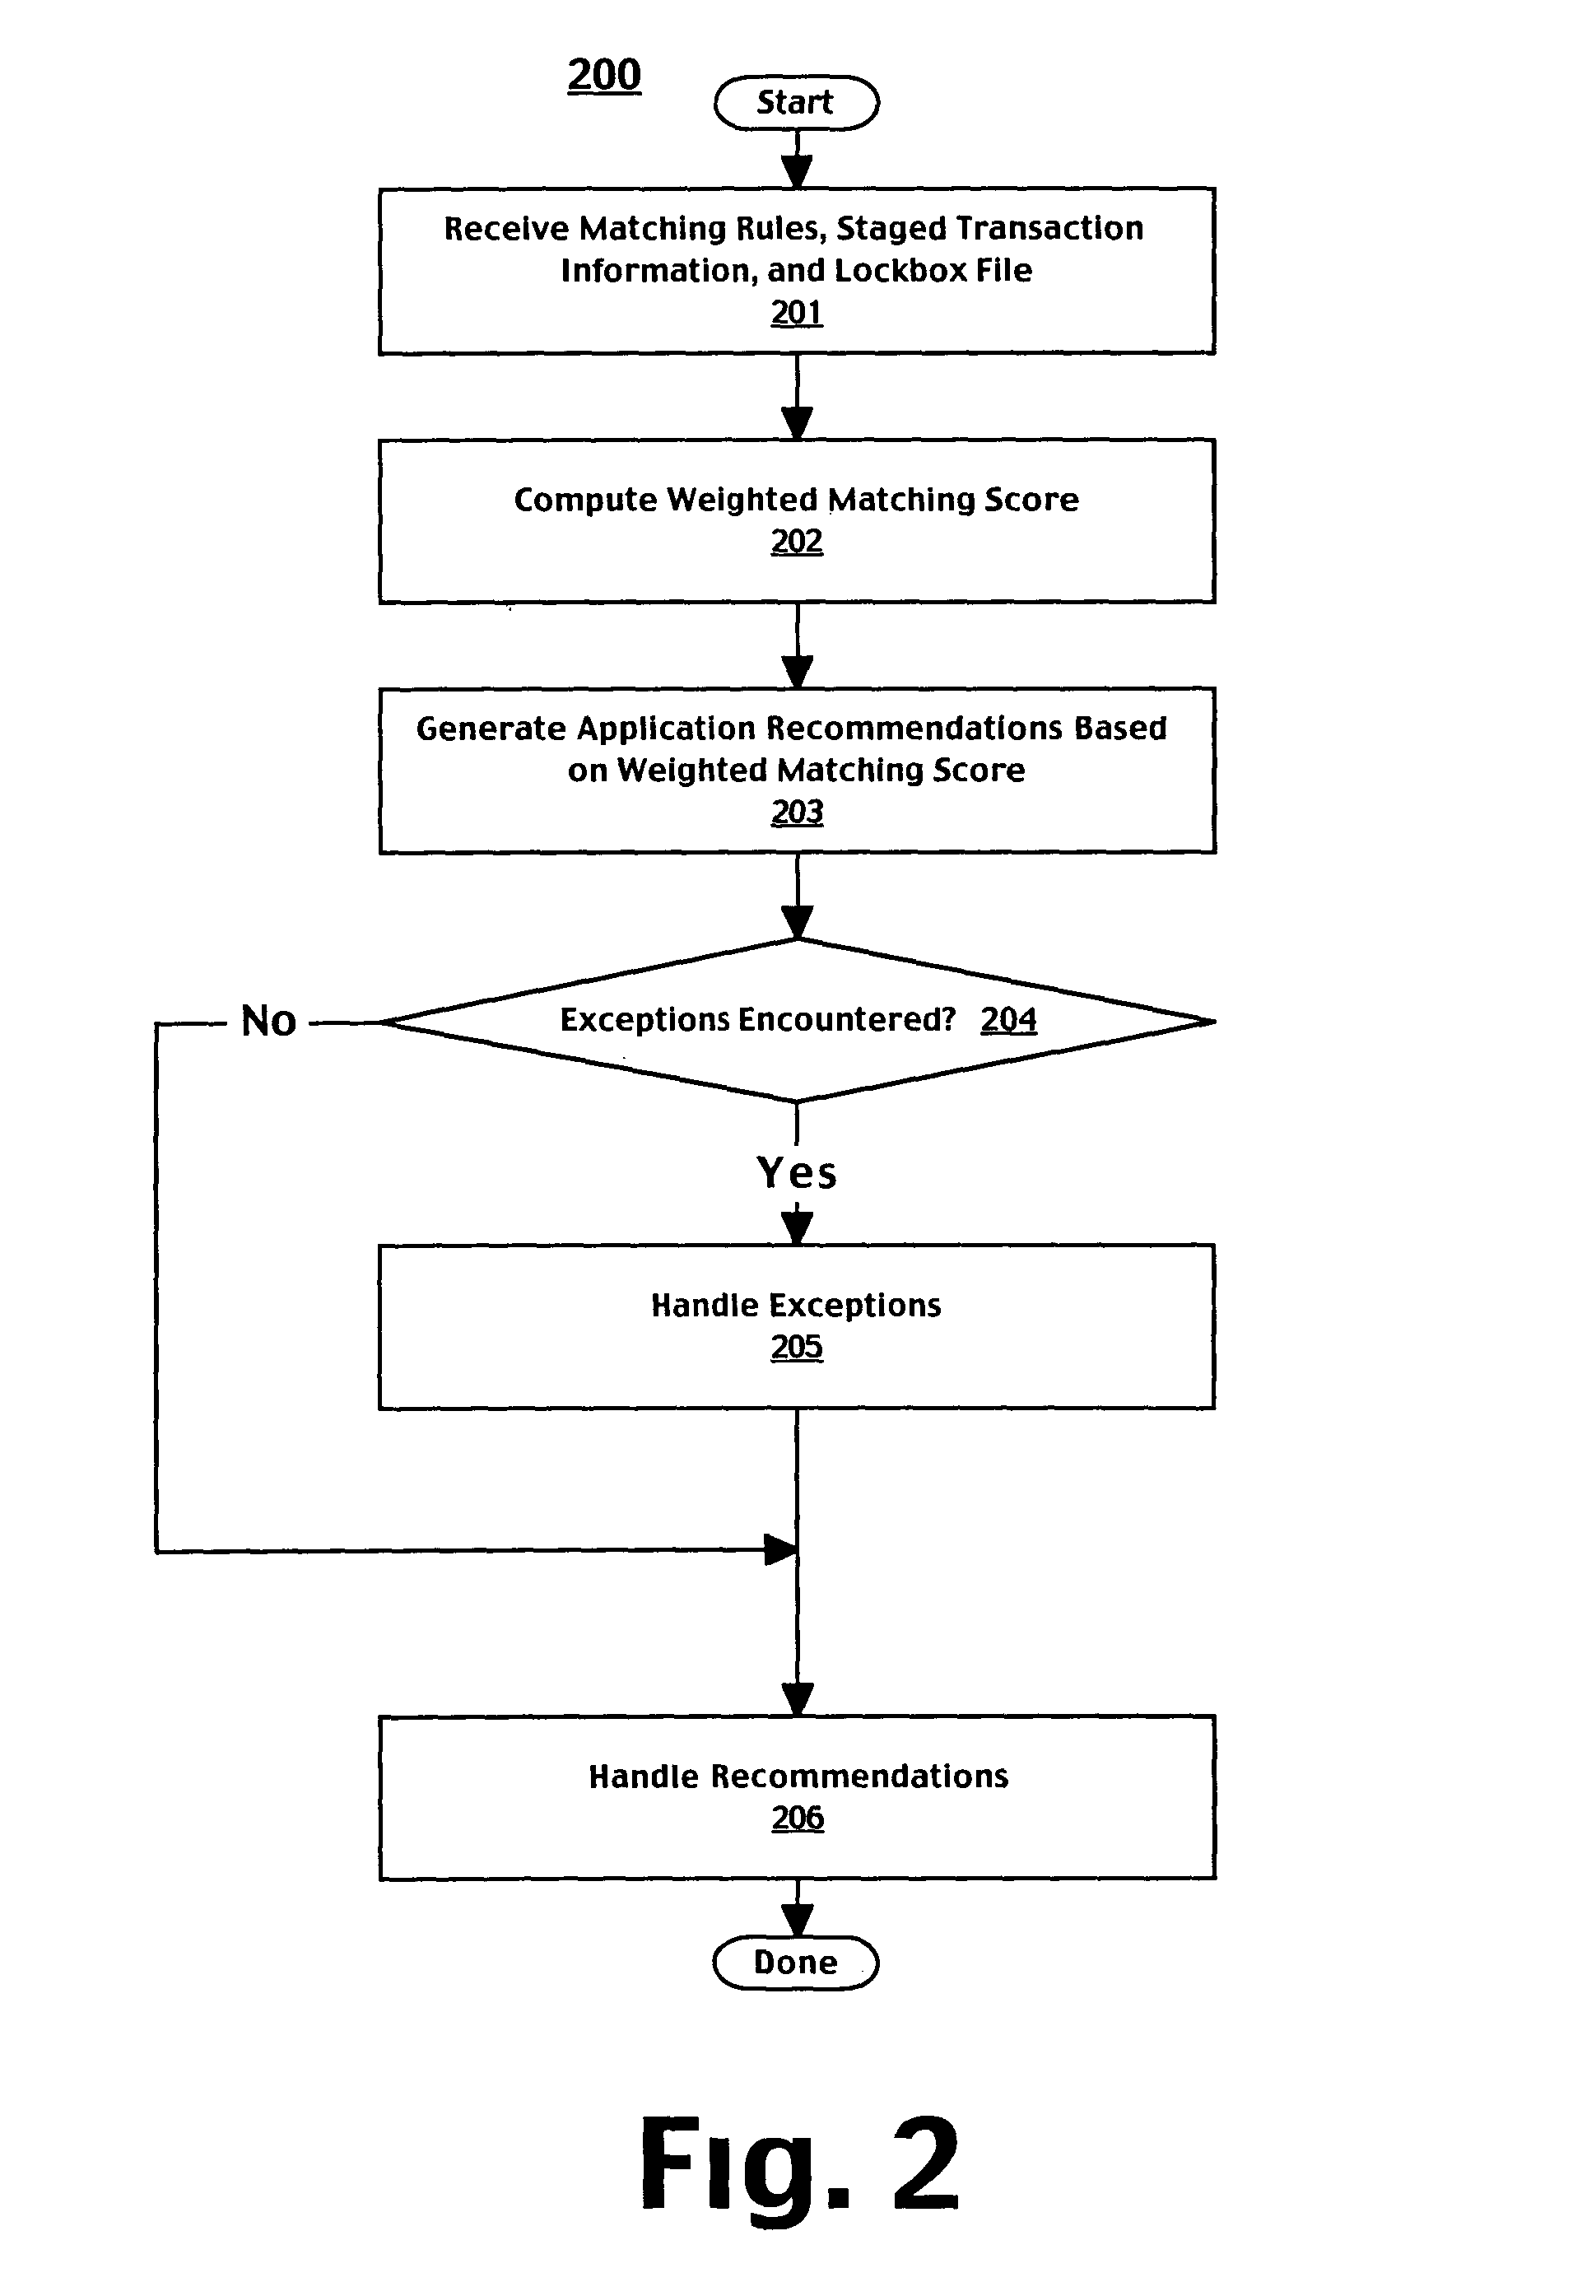 Method and system for matching remittances to transactions based on weighted scoring and fuzzy logic